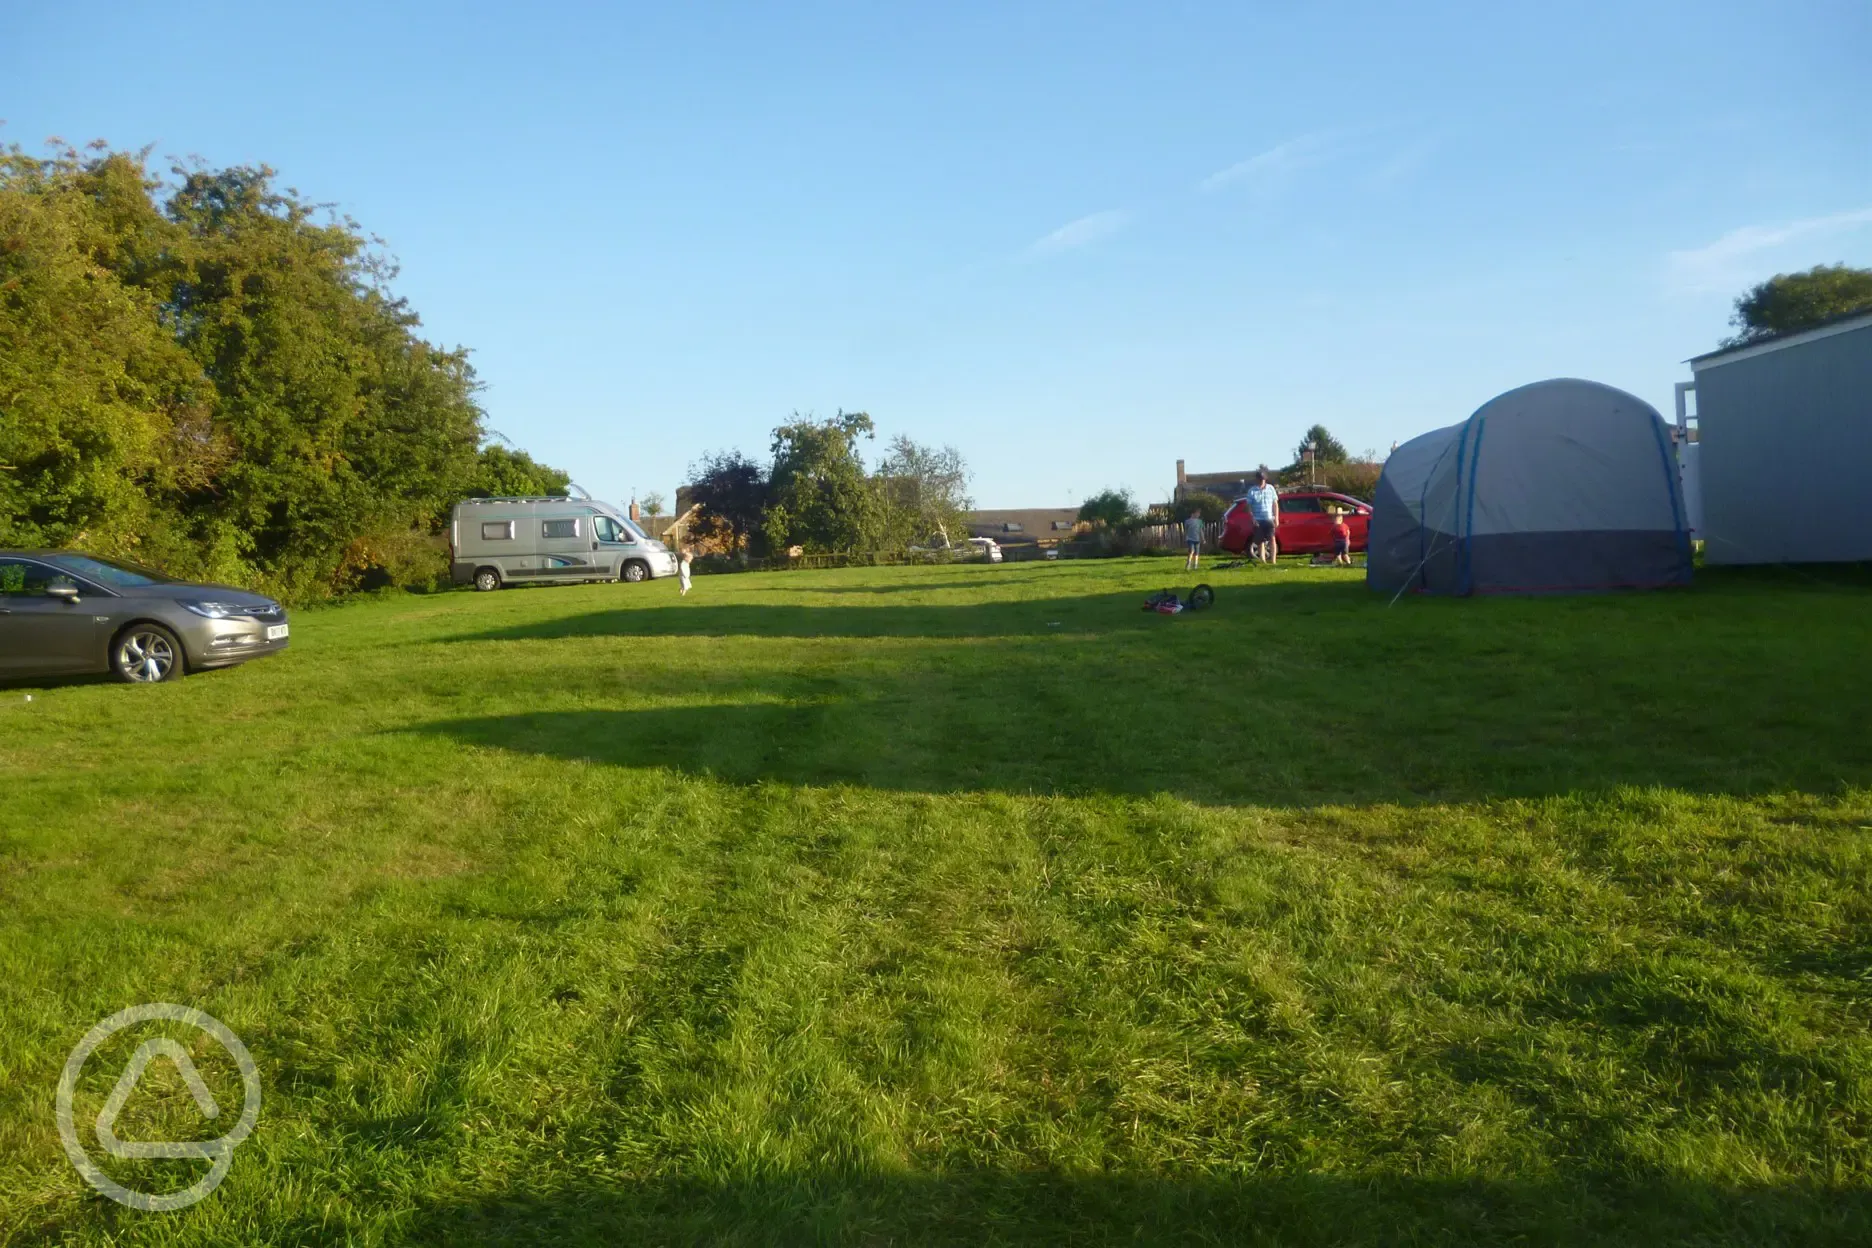 View of campsite pitches